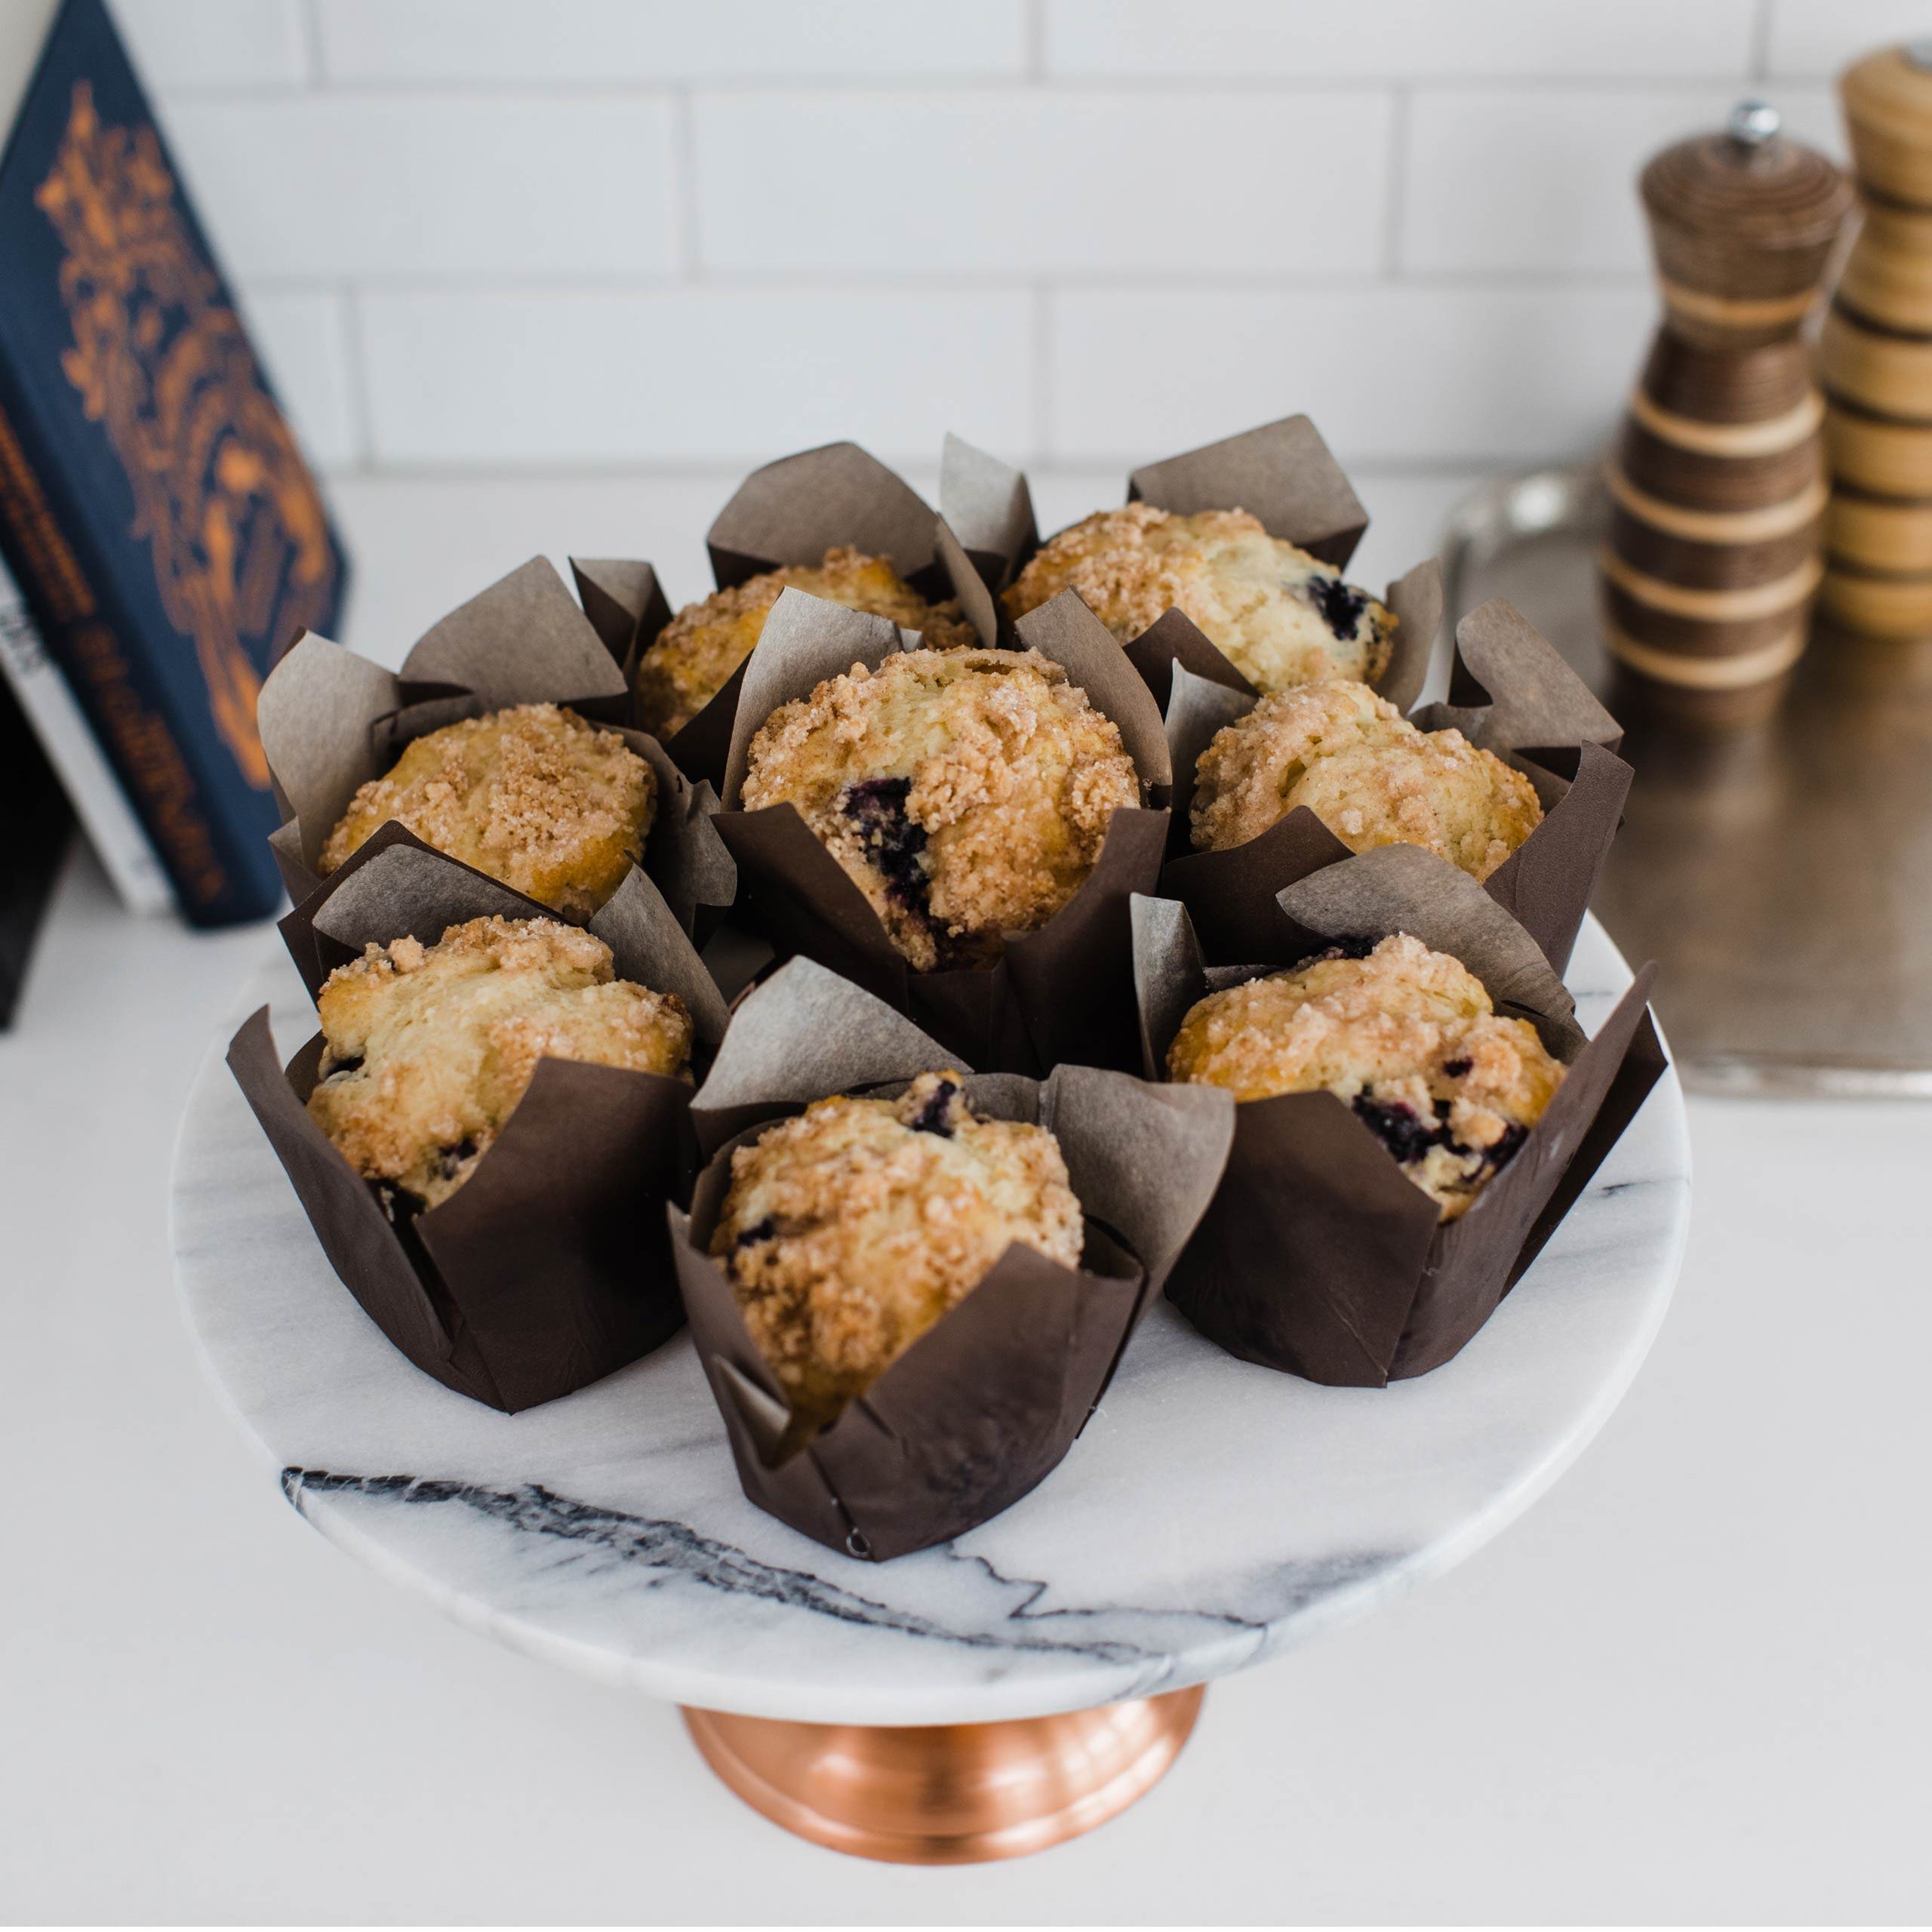 Blueberry Streusel muffins